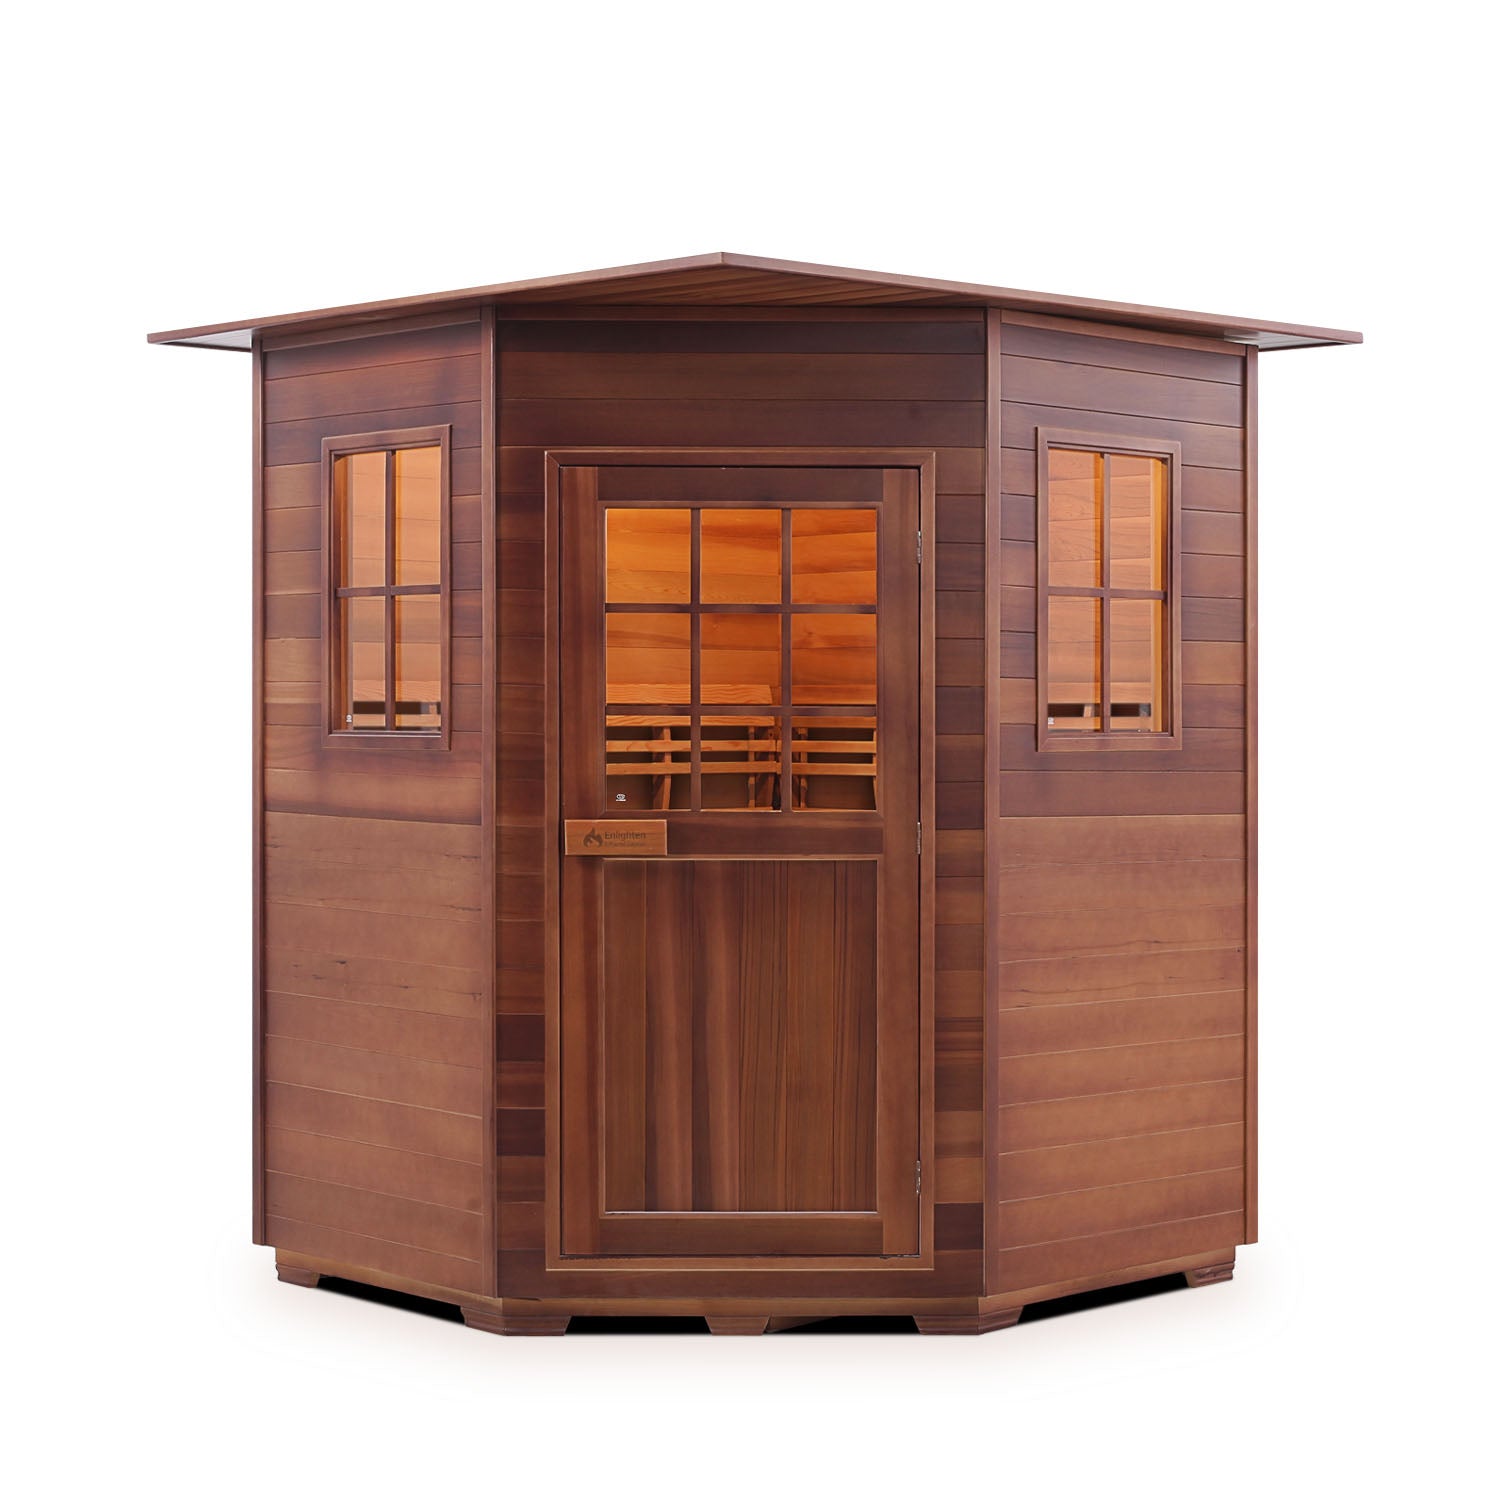 Enlighten Sauna Dry traditional Moonlight Canadian Red Cedar Wood Outside And Inside indoor Roofed four person corner location sauna front view